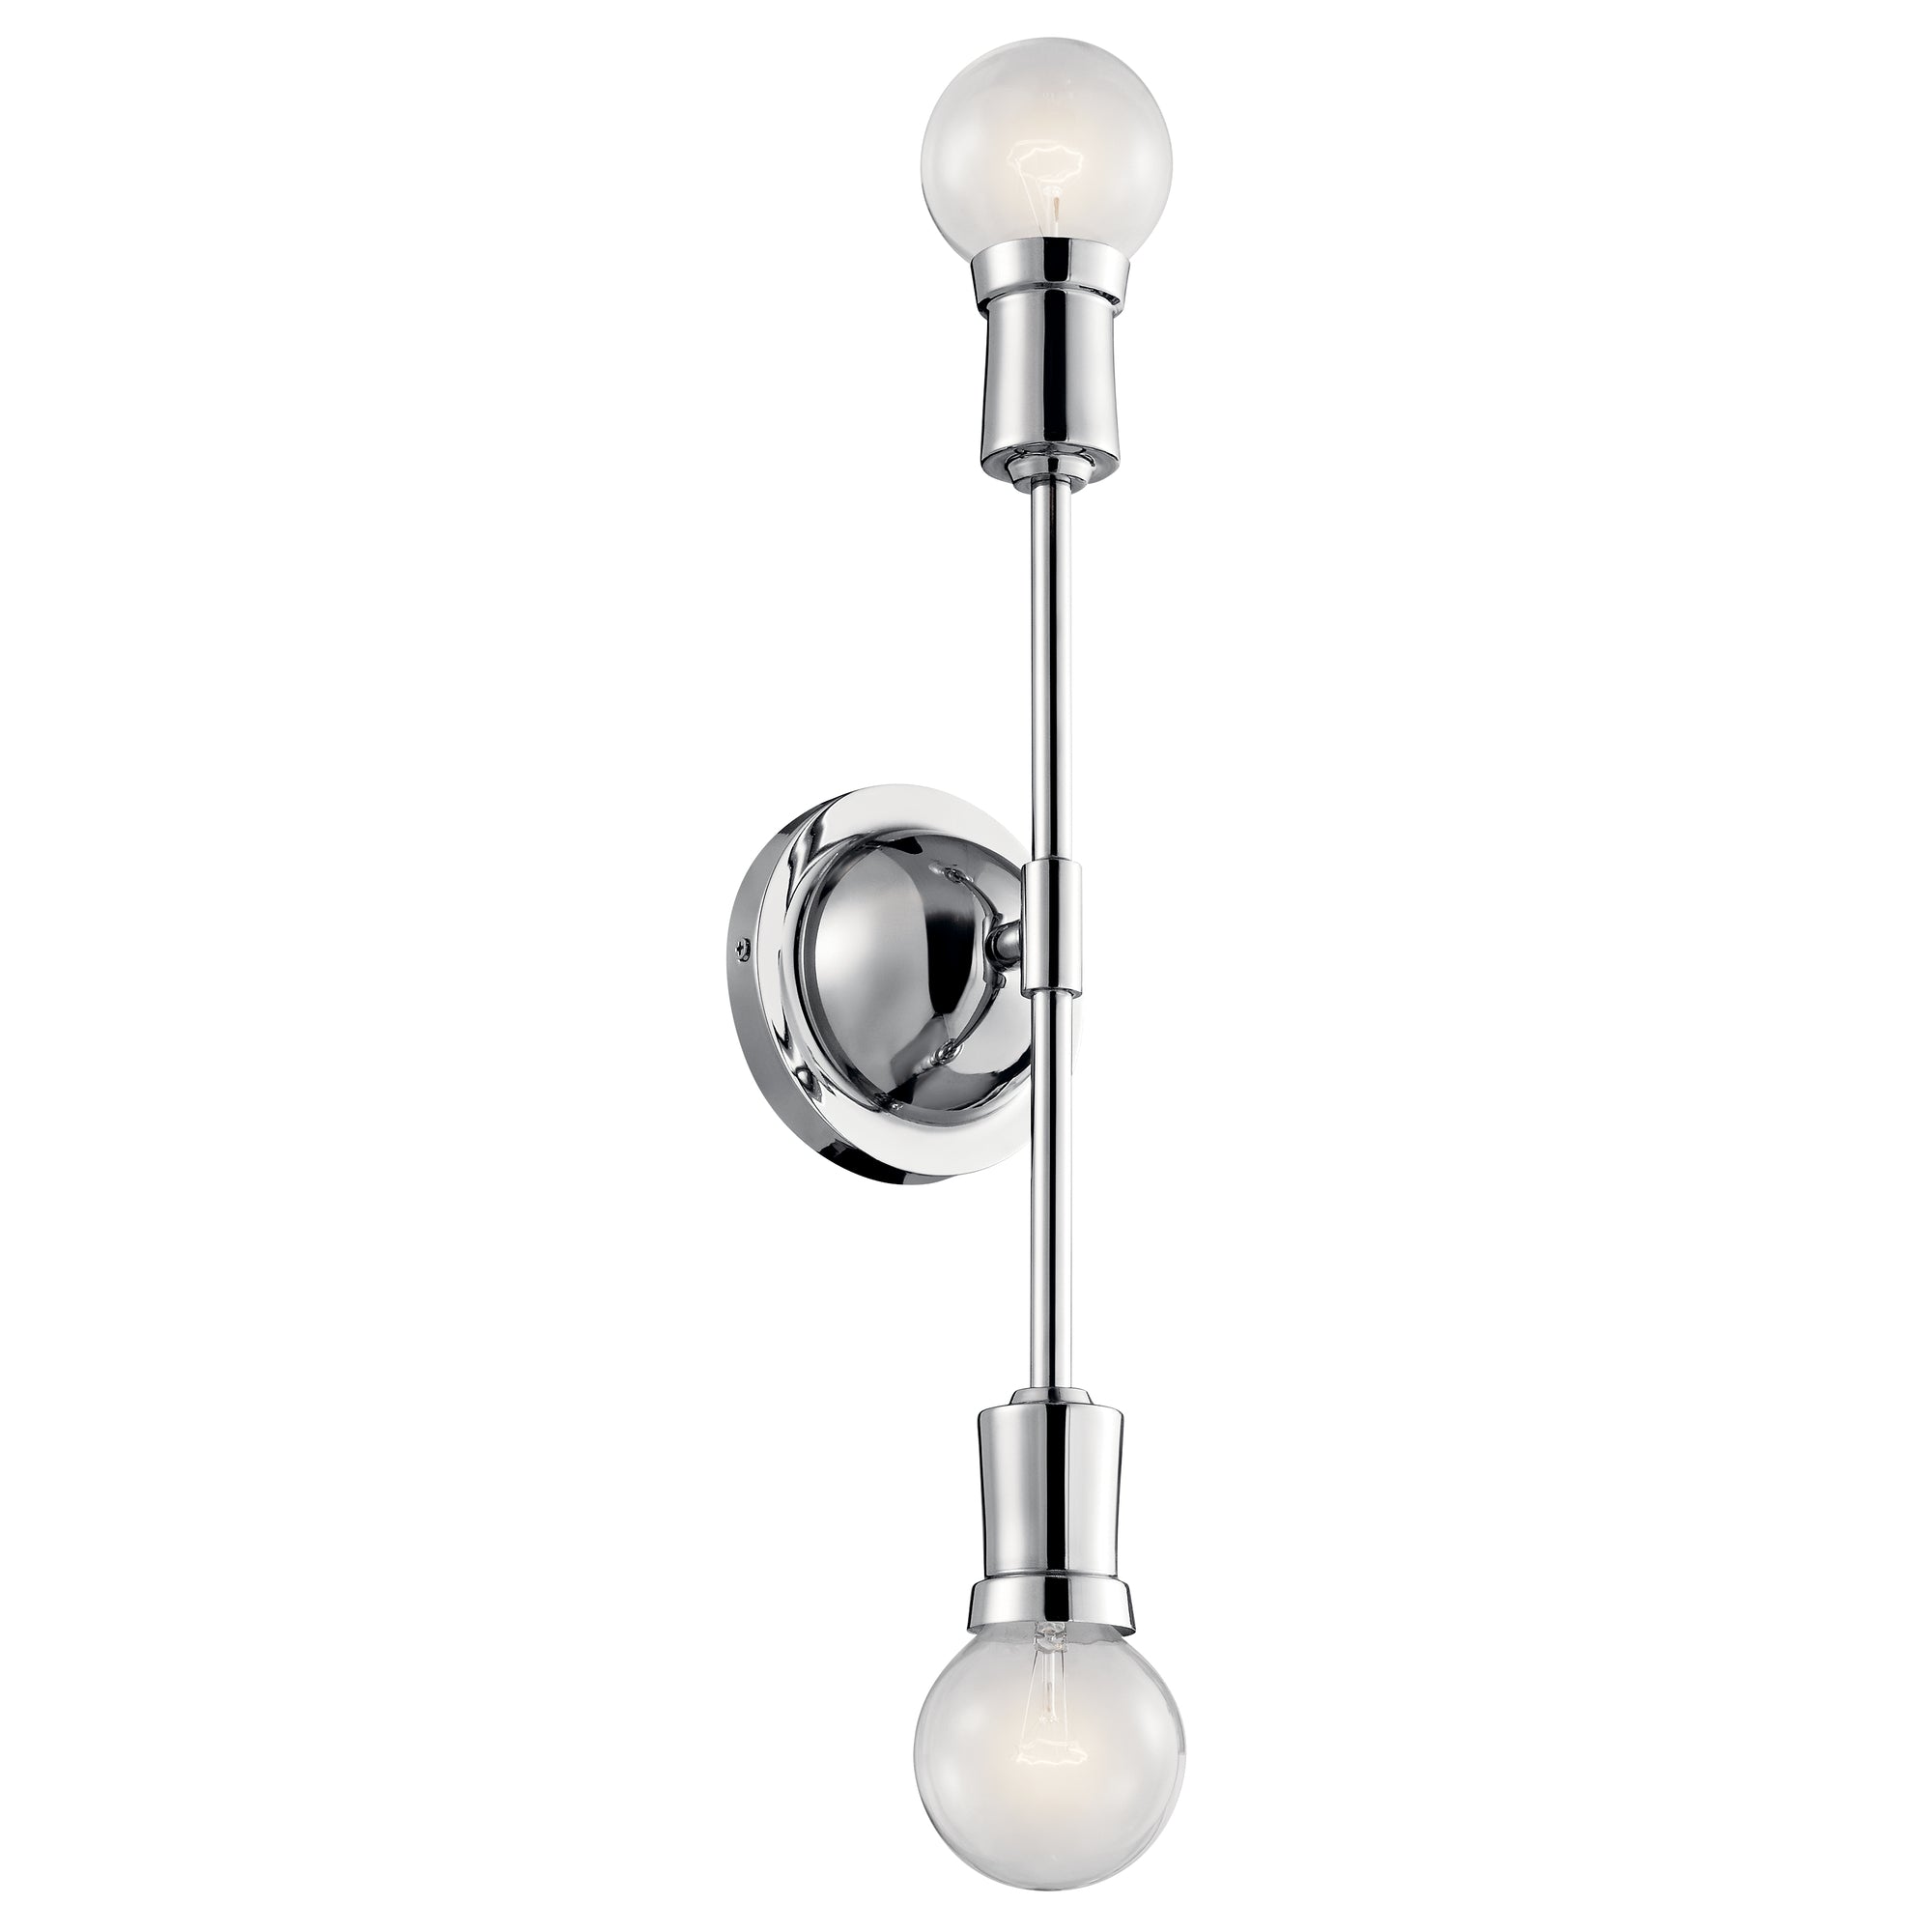 ARMSTRONG Sconce Chrome - 43195CH | KICHLER